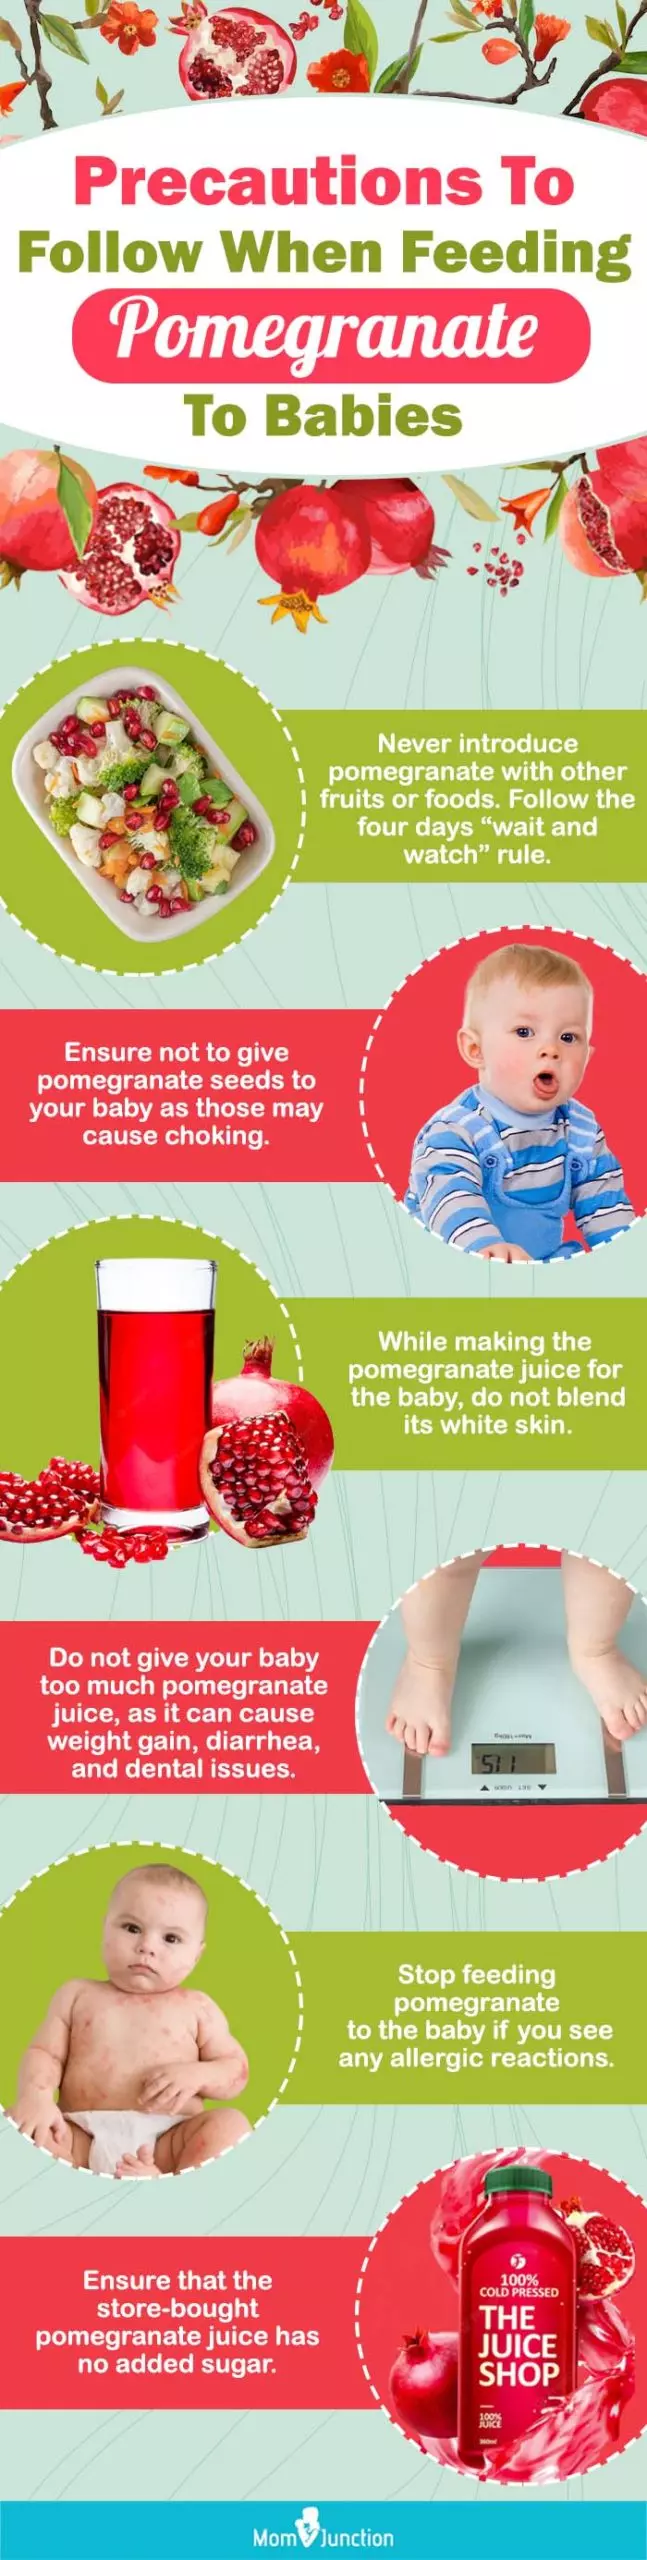 pomegranate for babies safety tips to follow (infographic)